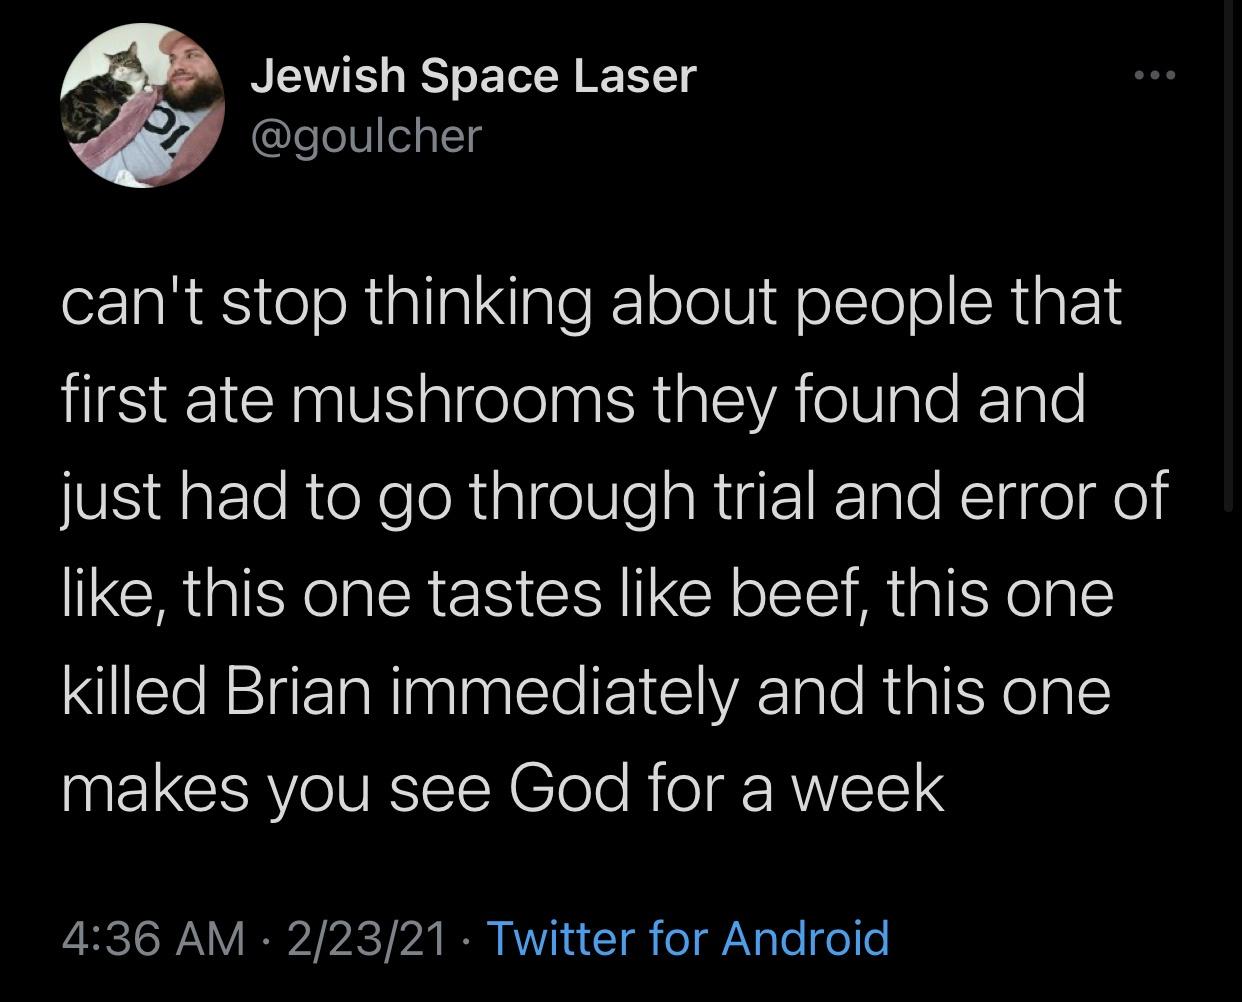 screenshot - Jewish Space Laser can't stop thinking about people that first ate mushrooms they found and just had to go through trial and error of , this one tastes beef, this one killed Brian immediately and this one makes you see God for a week 22321 Tw